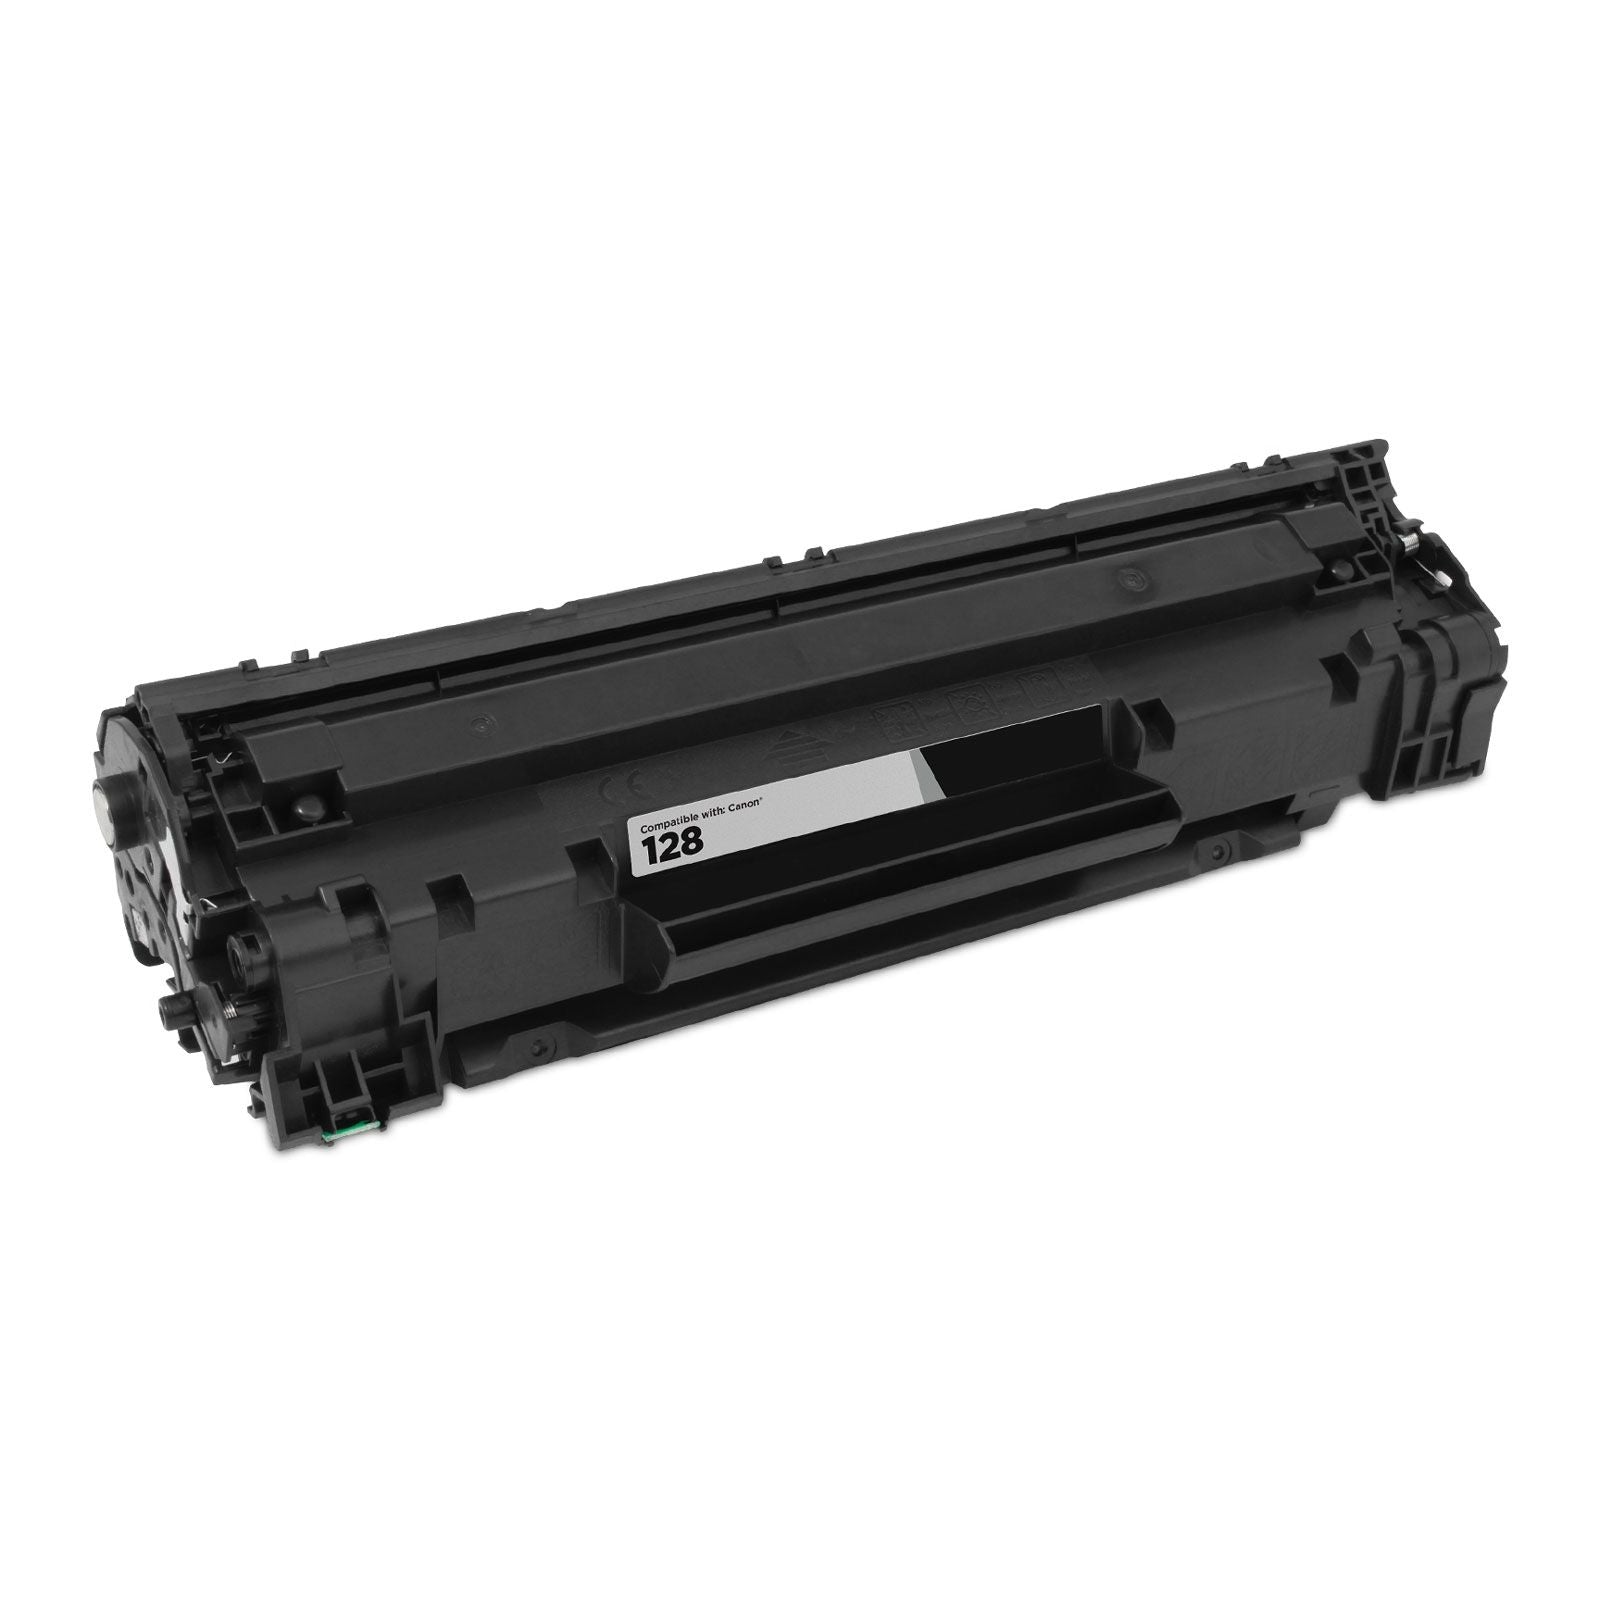 #128 IMPERIAL BRAND CANON 128 LASER TONER 2,100 PAGES